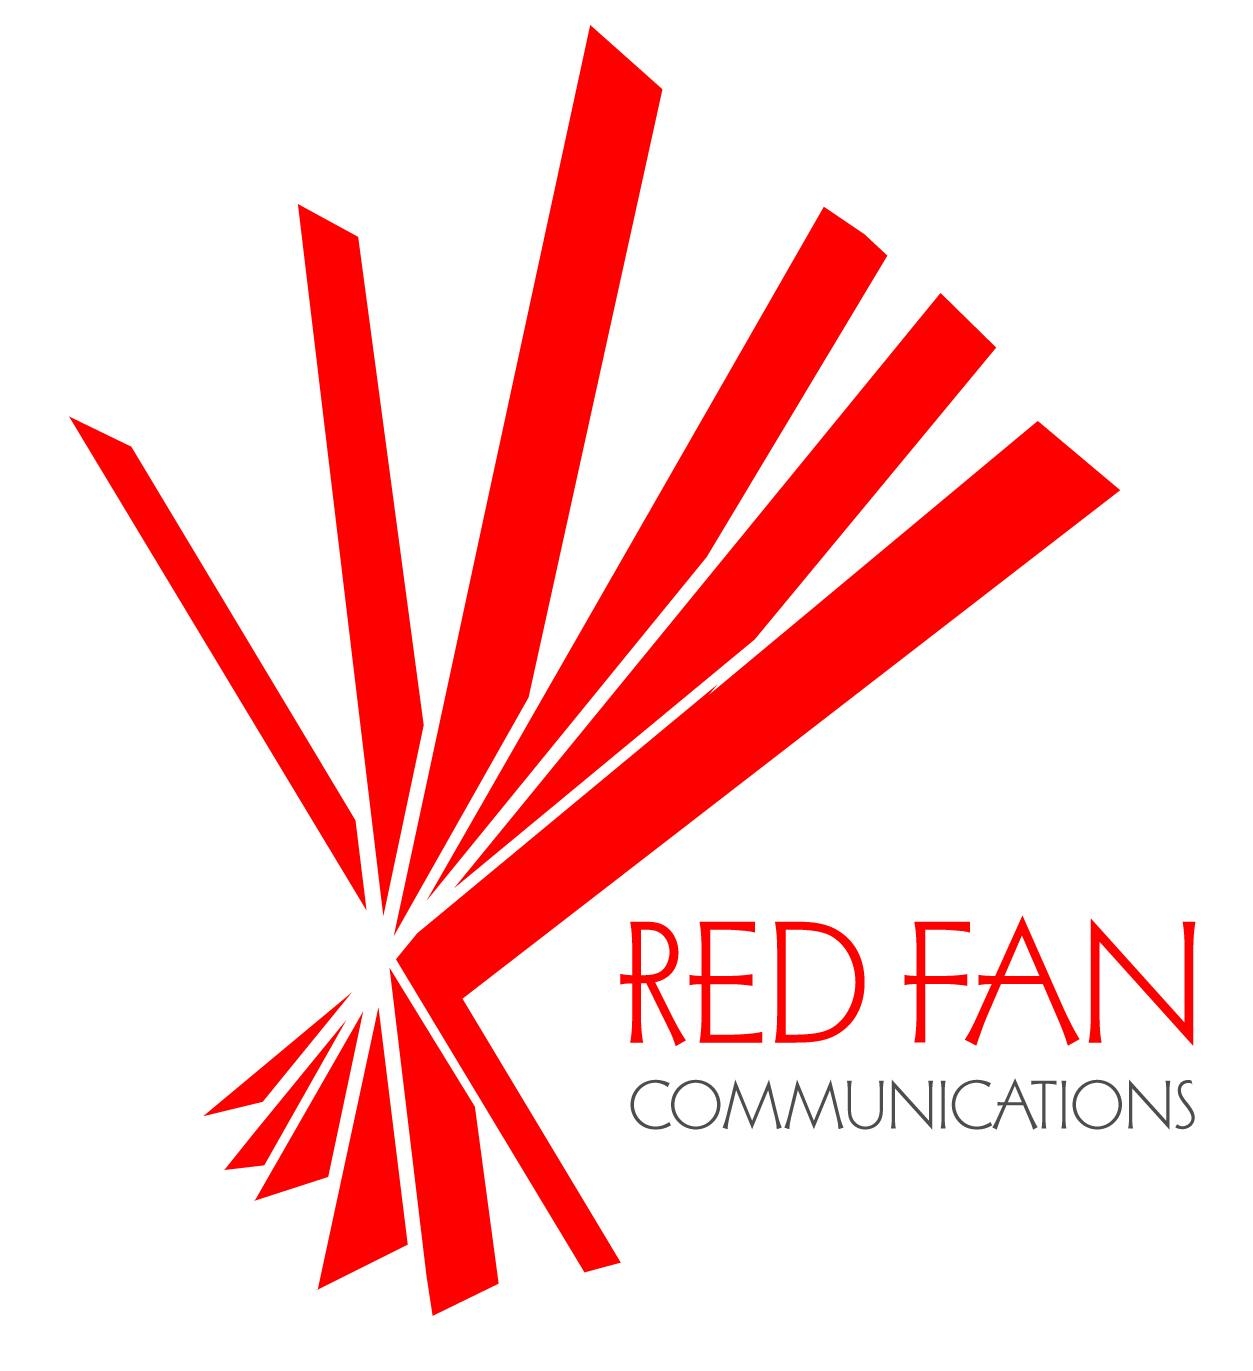  Leading Public Relations Business Logo: Red Fan Communications